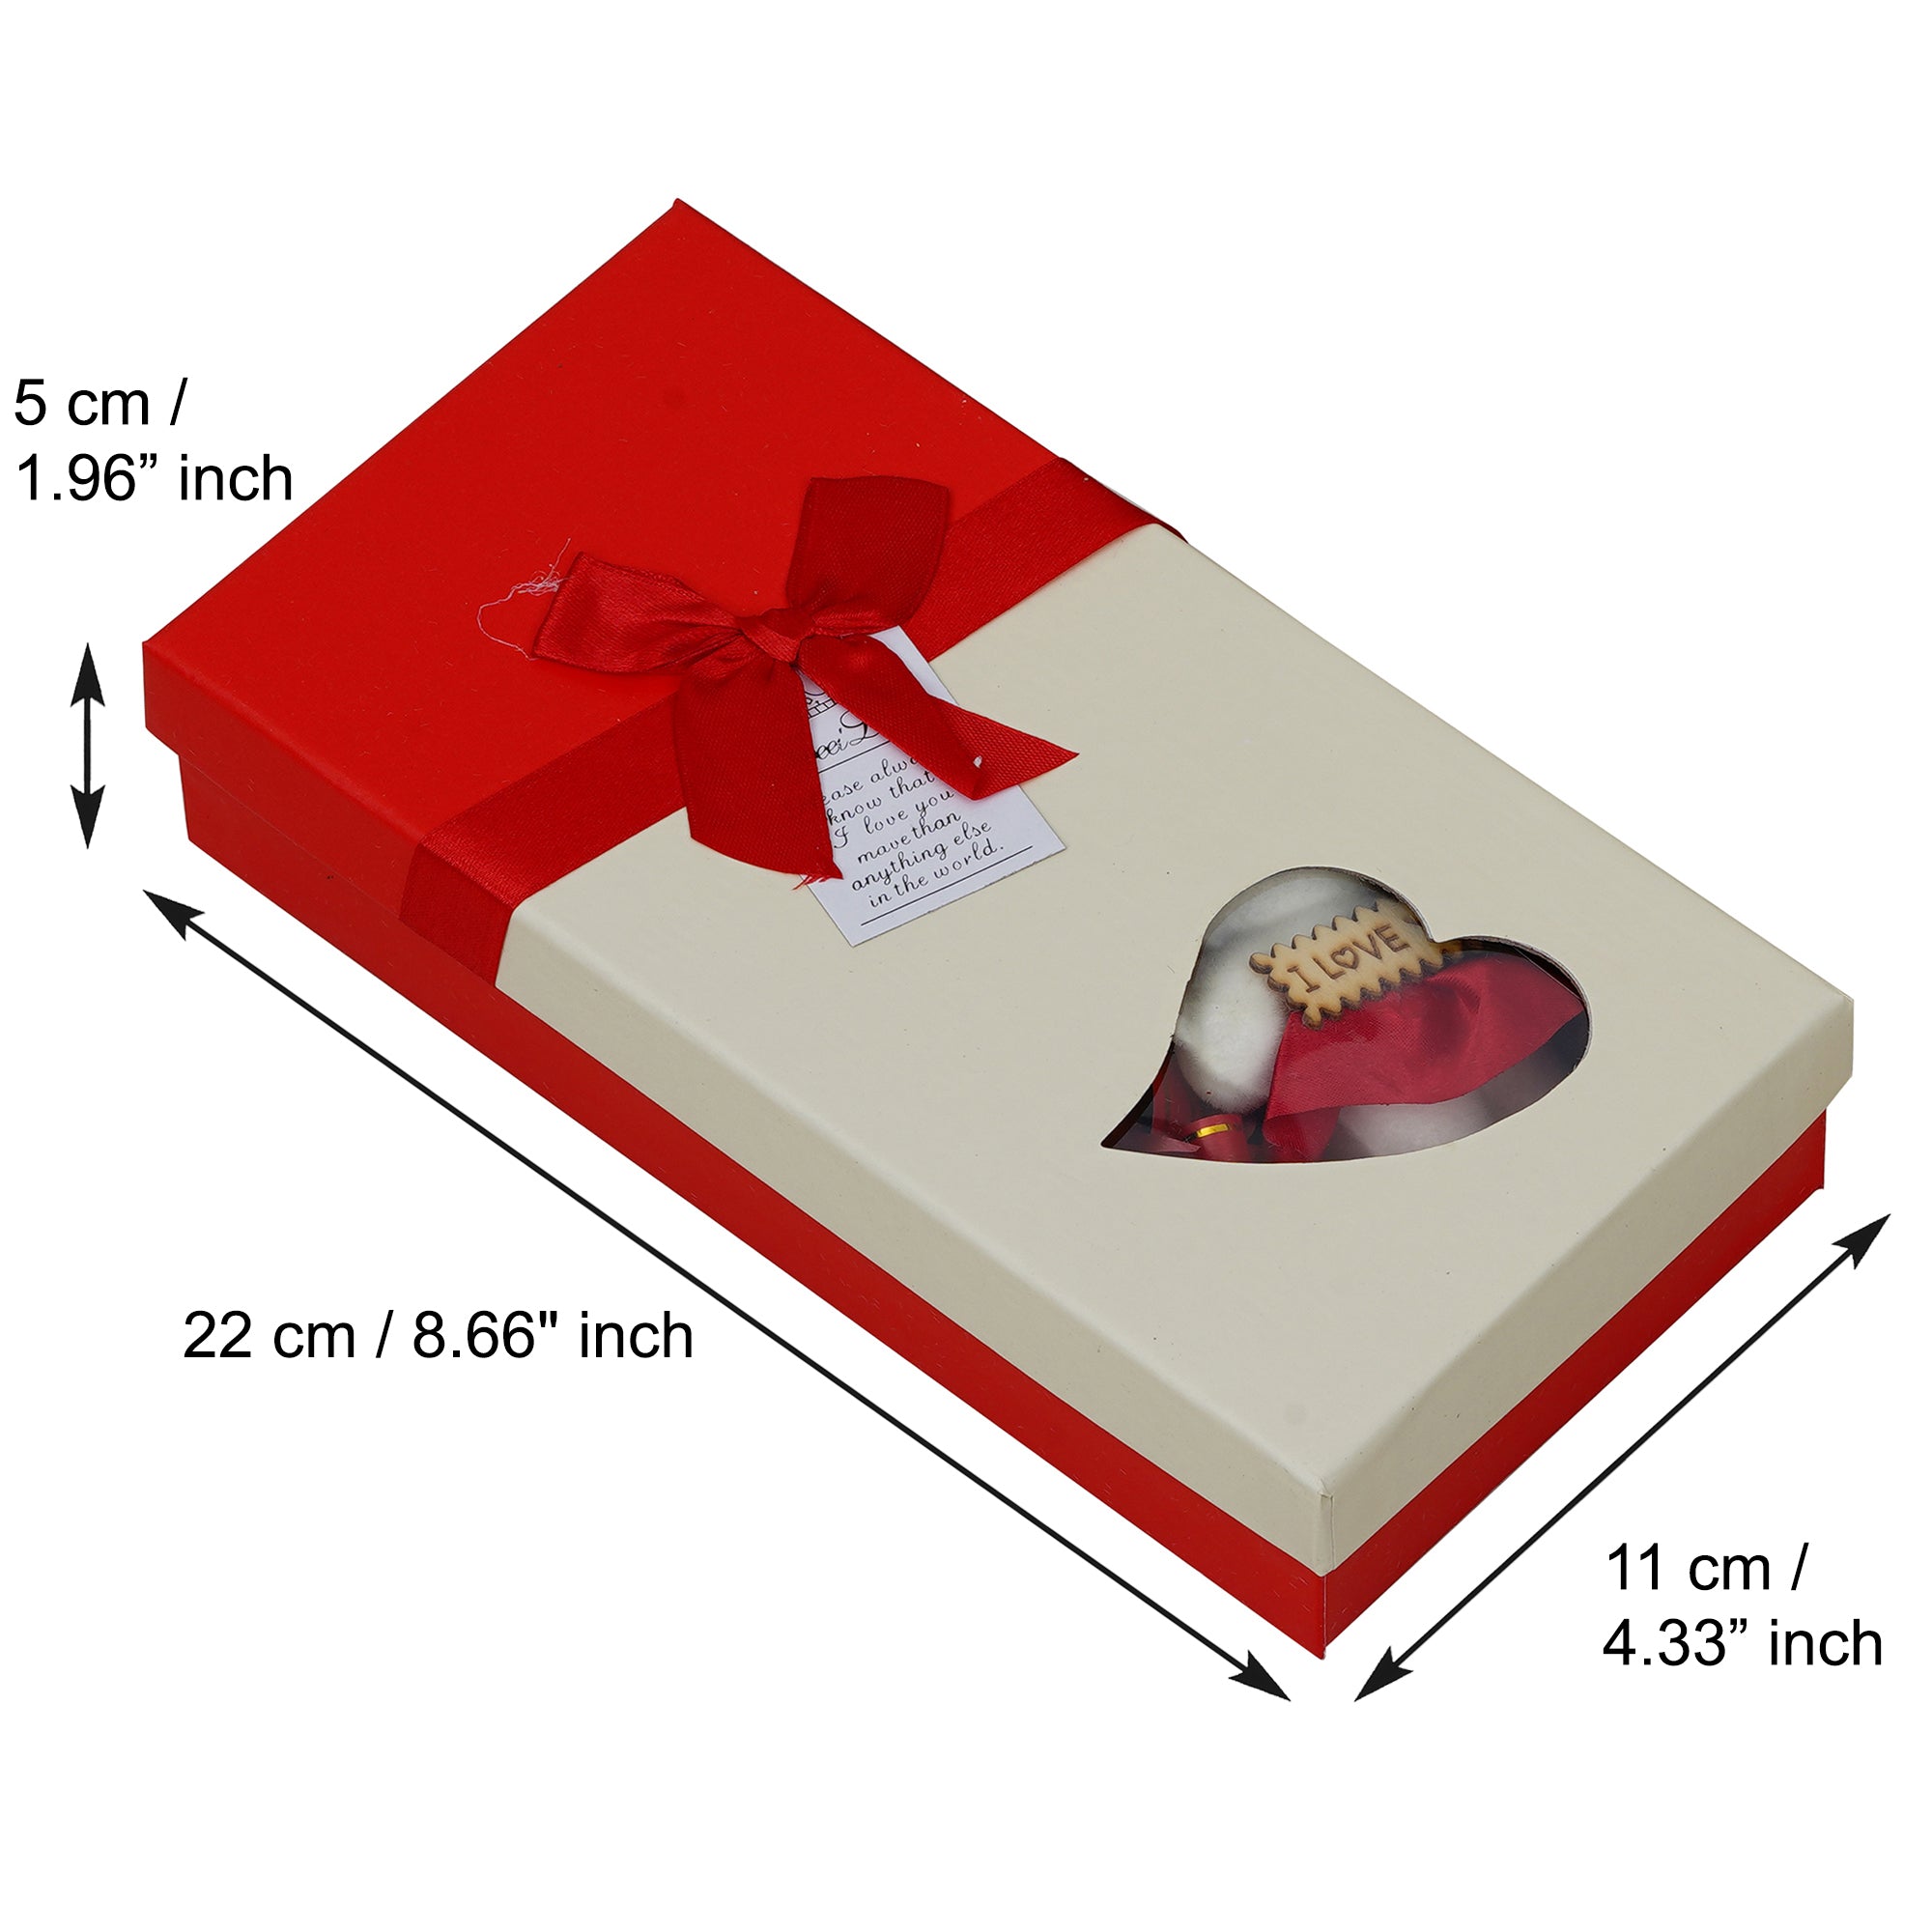 Red Roses Bouquet and White & Red Teddy Bear Valentine's Rectangle Shaped Gift Box 3